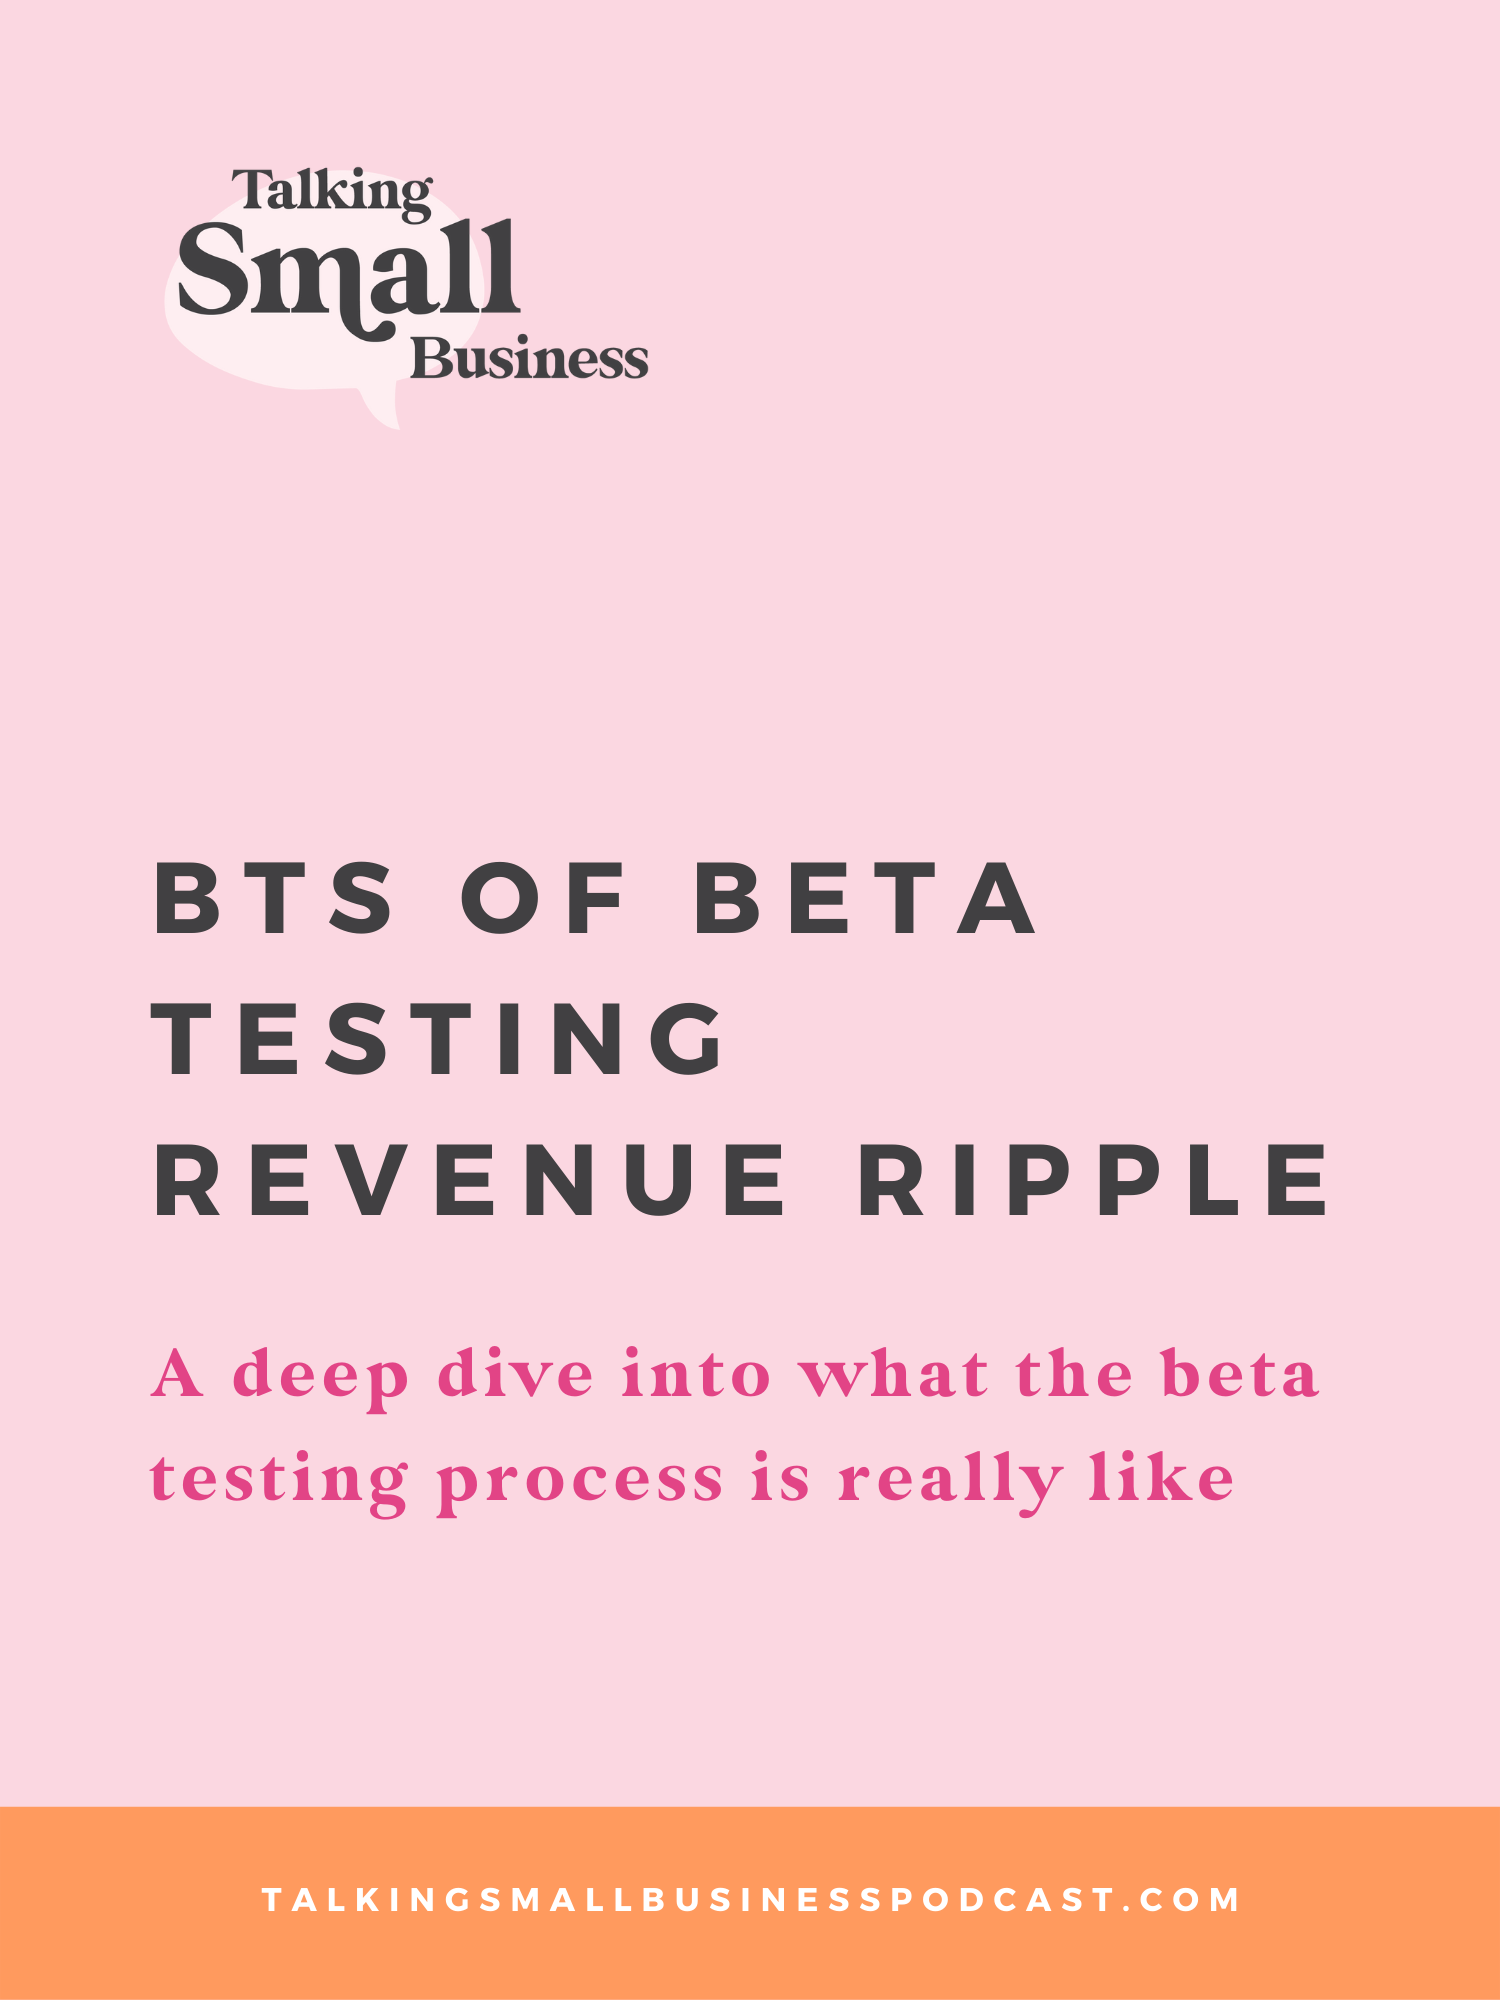 Beta Testing Revenue Ripple: a behind the scenes conversation about beta testing for biz owners on Talking Small Business